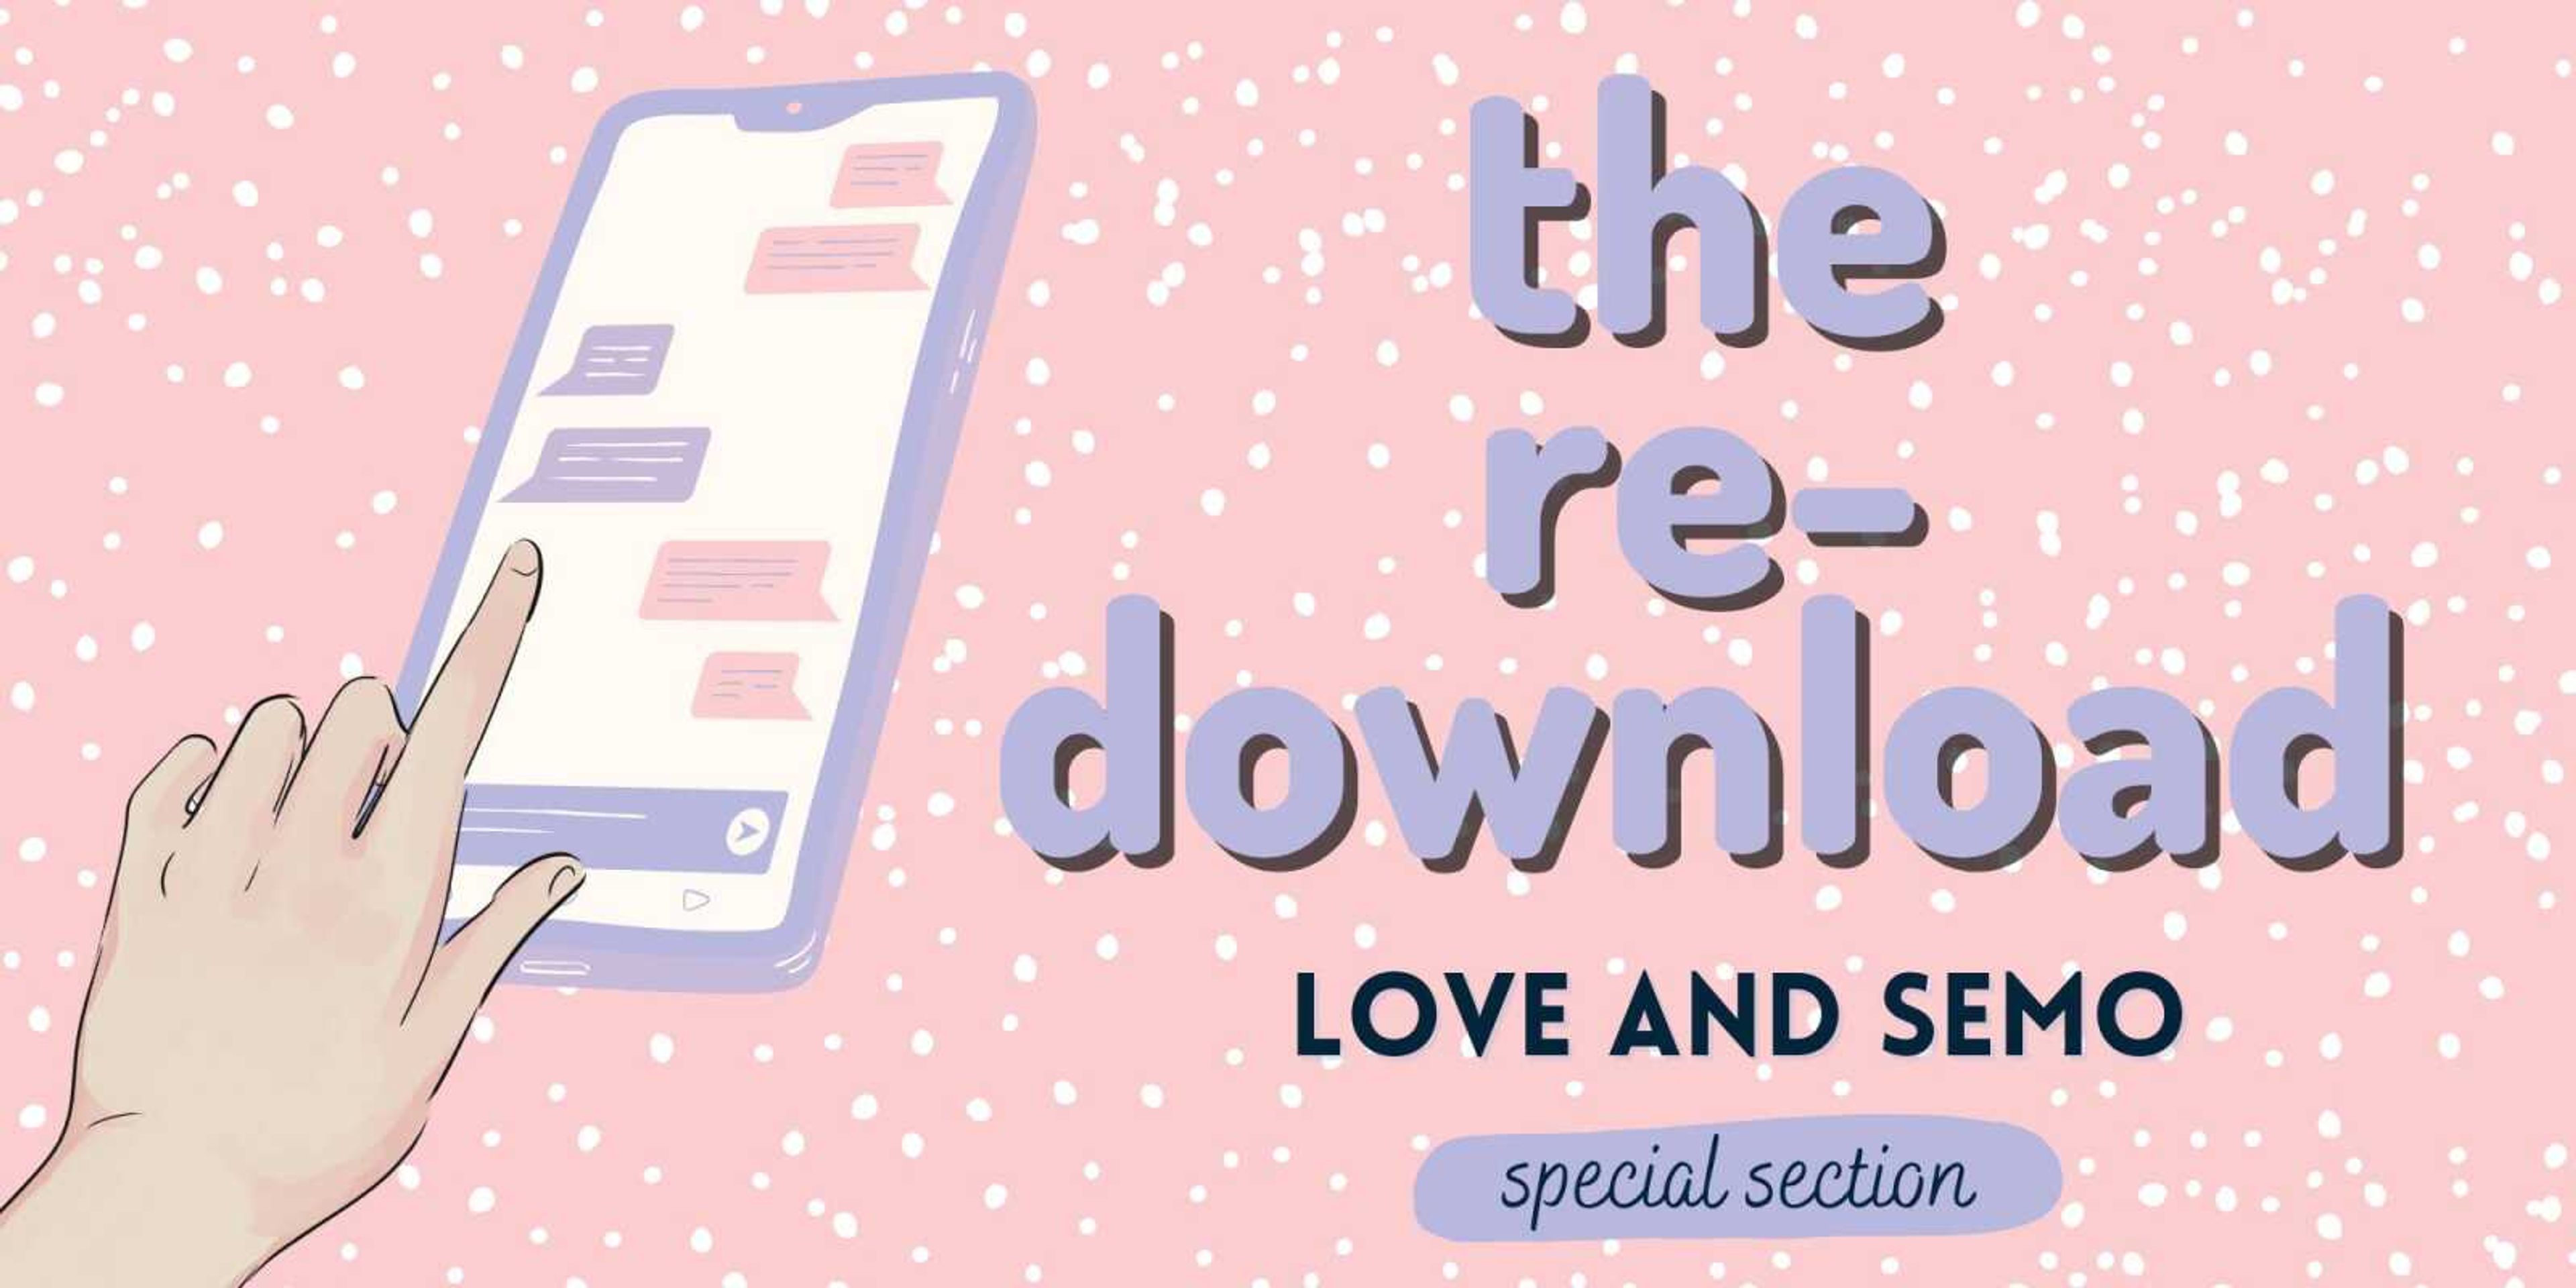 The Re-Download:  Behind the vicious cycle of deleting and redownloading dating apps